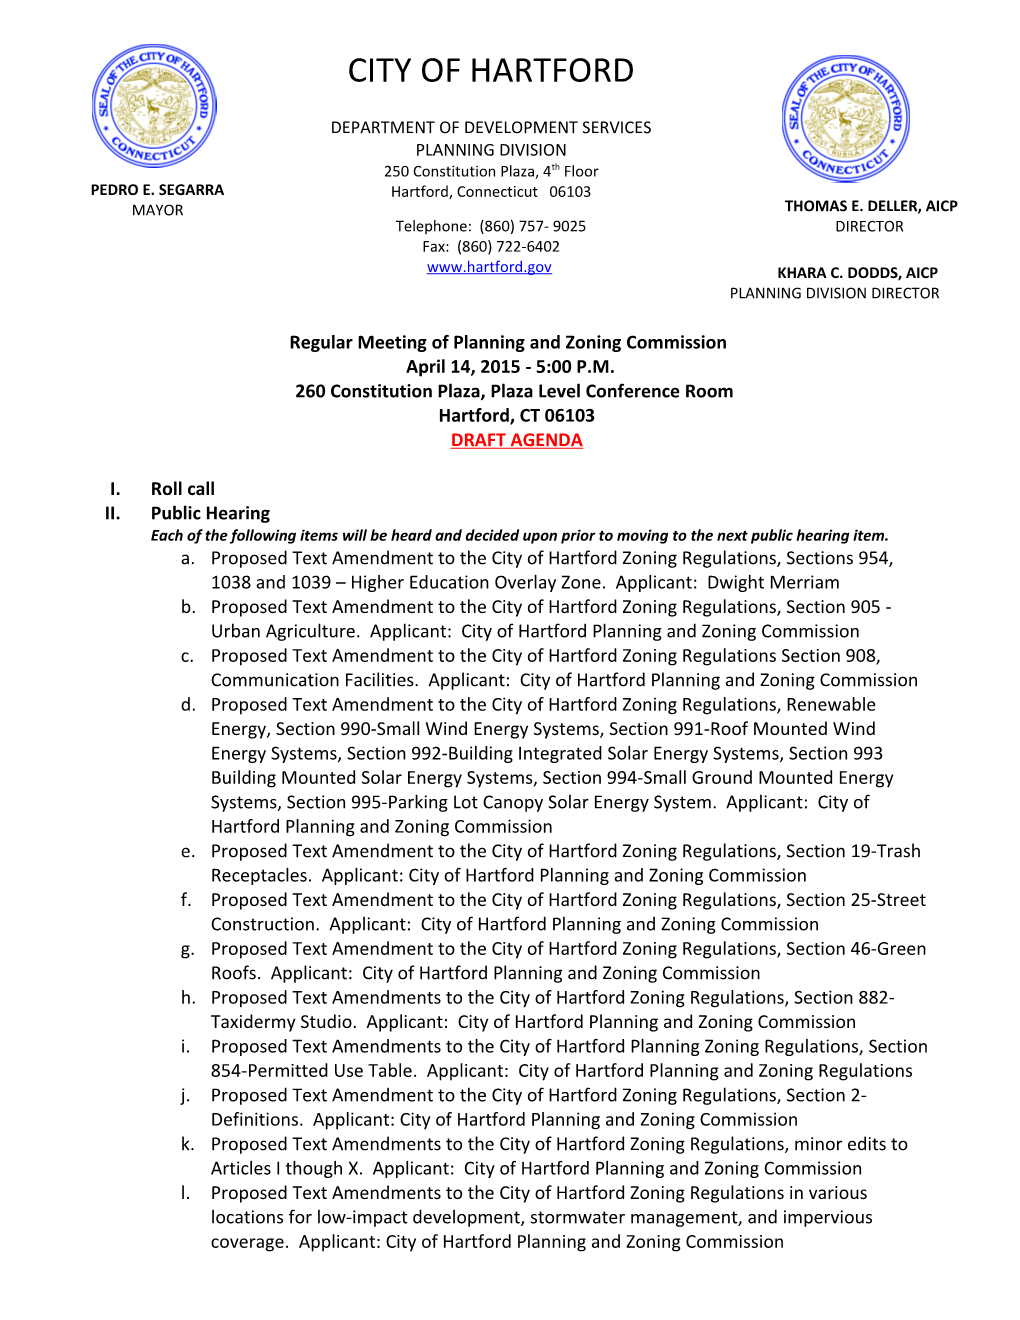 Regular Meeting of Planning and Zoning Commission